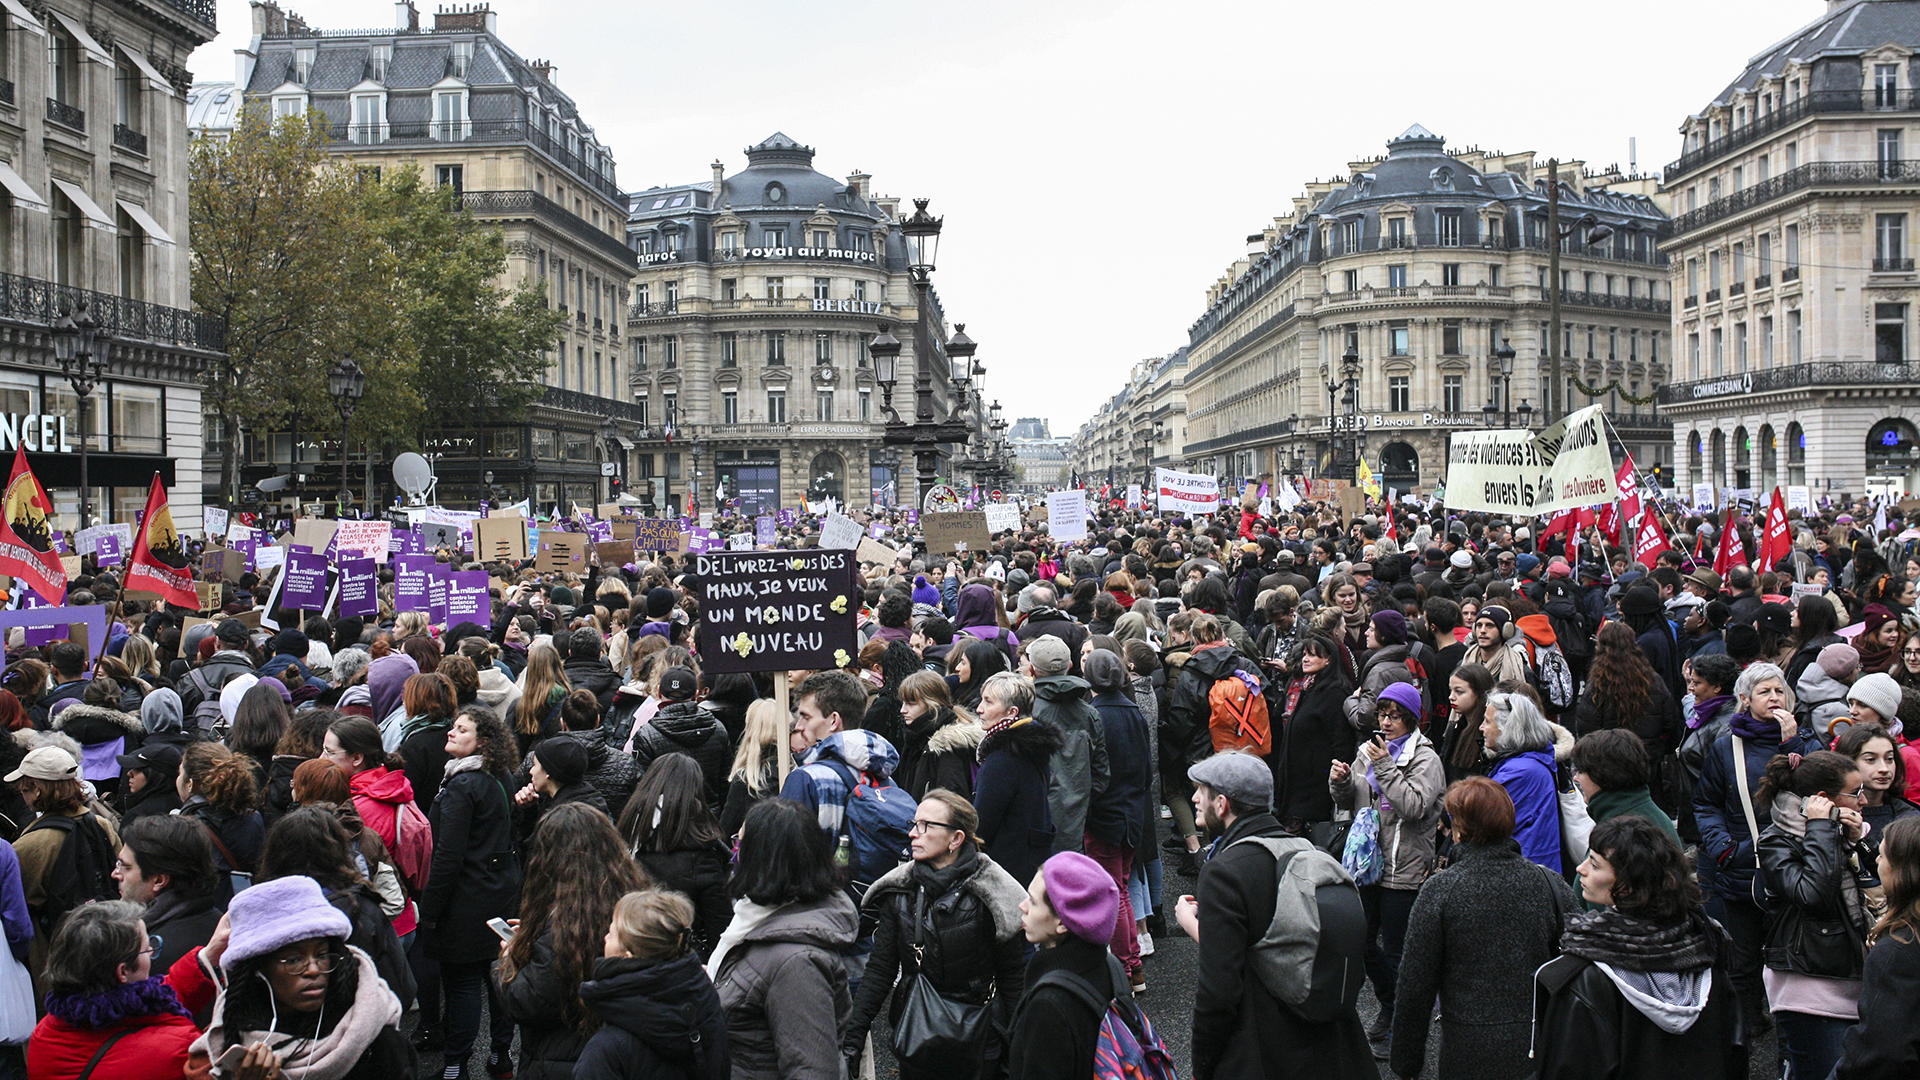 ONLY FOR FEATURE: Why has it been such a deadly year for French women? by Megan Clement [DON'T USE]